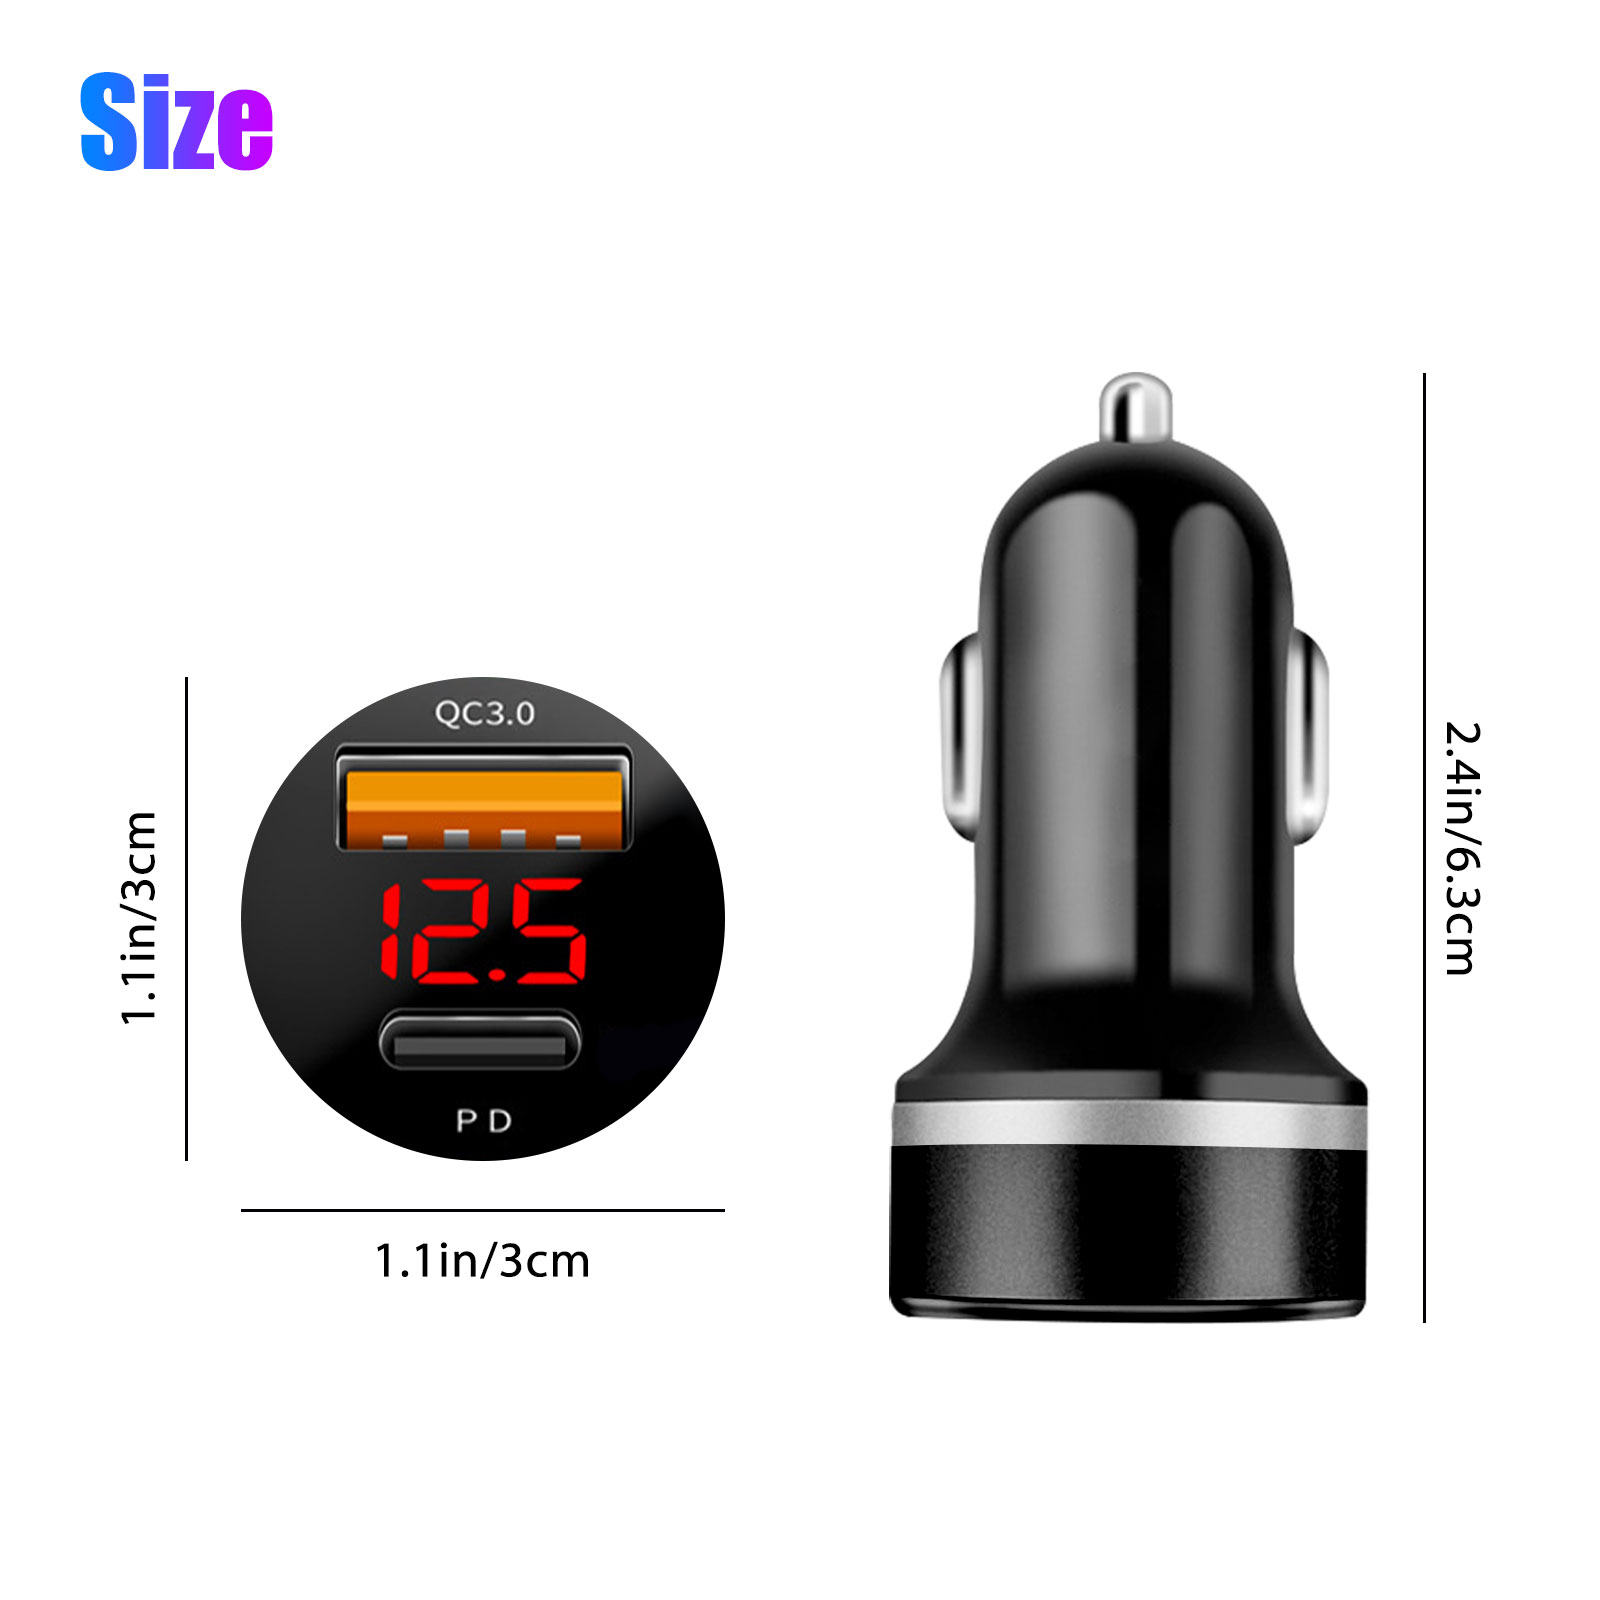 TSV USB C Car Charger, 36W Fast USB Car Charger PD QC 3.0 Dual Port Car Adapter, Mini Alloy USB Charger Compatible with iPhone 12, 12 Mini, 12 Pro, 12 Pro Max, 11 Pro Max, Pixel, Samsung - image 8 of 9